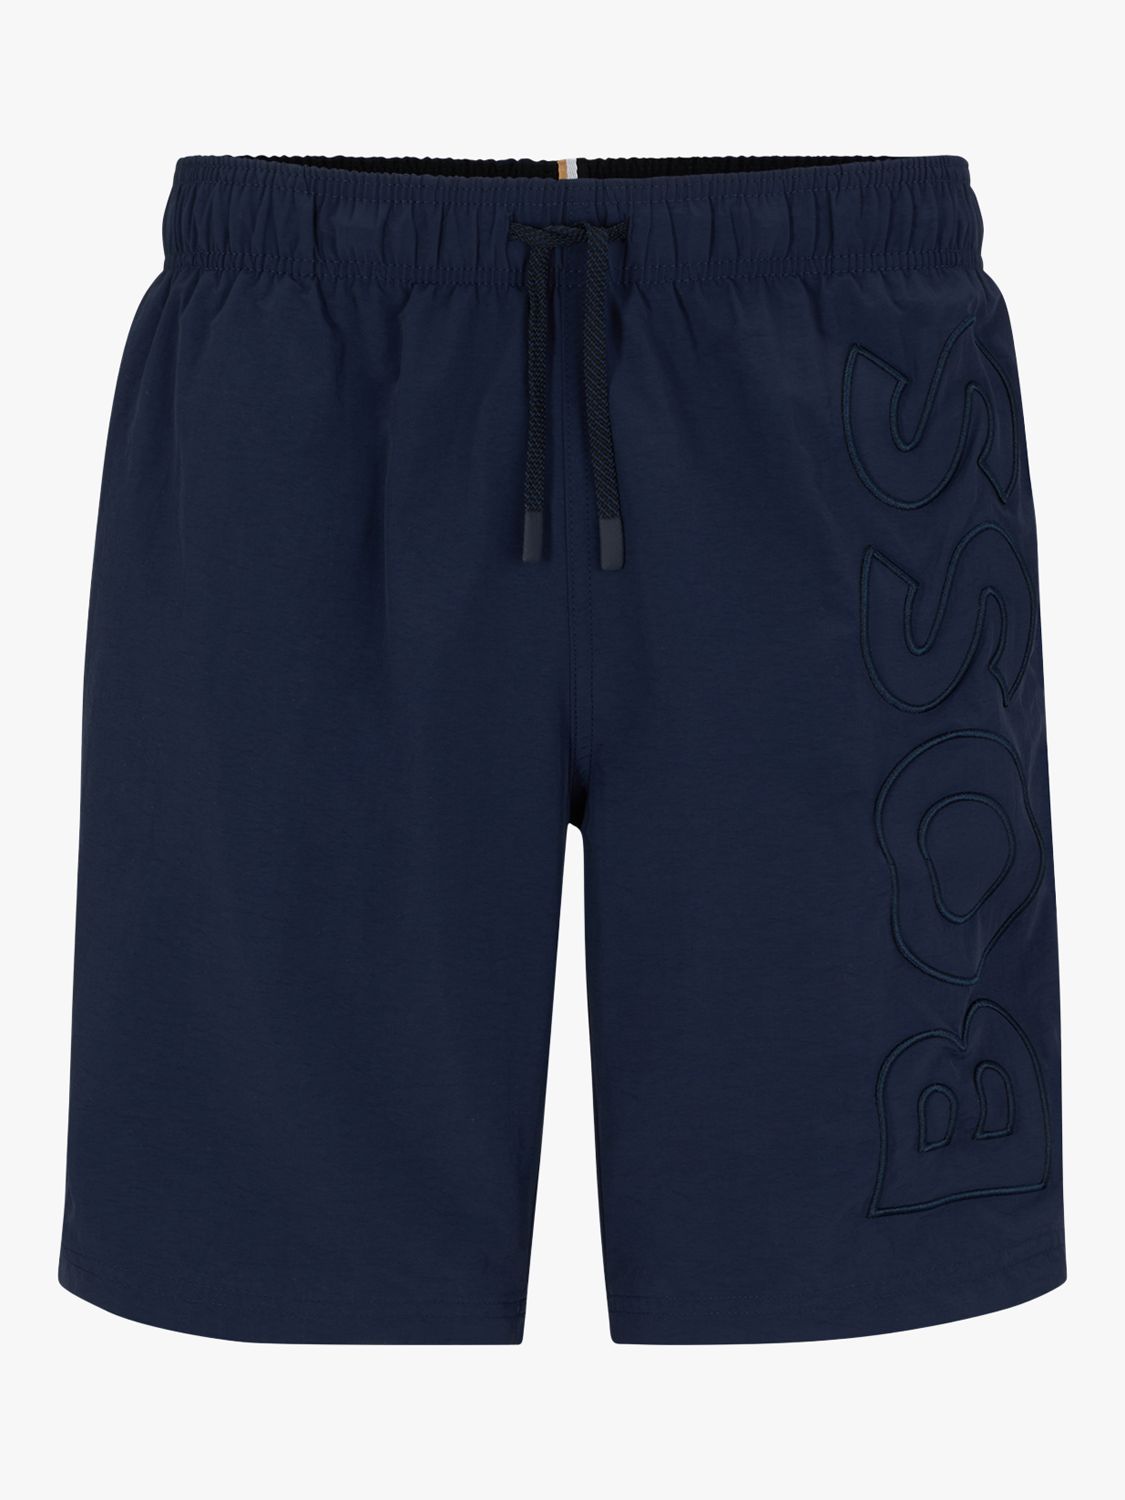 BOSS Whale Embroidered Logo Swim Shorts, Navy at John Lewis & Partners